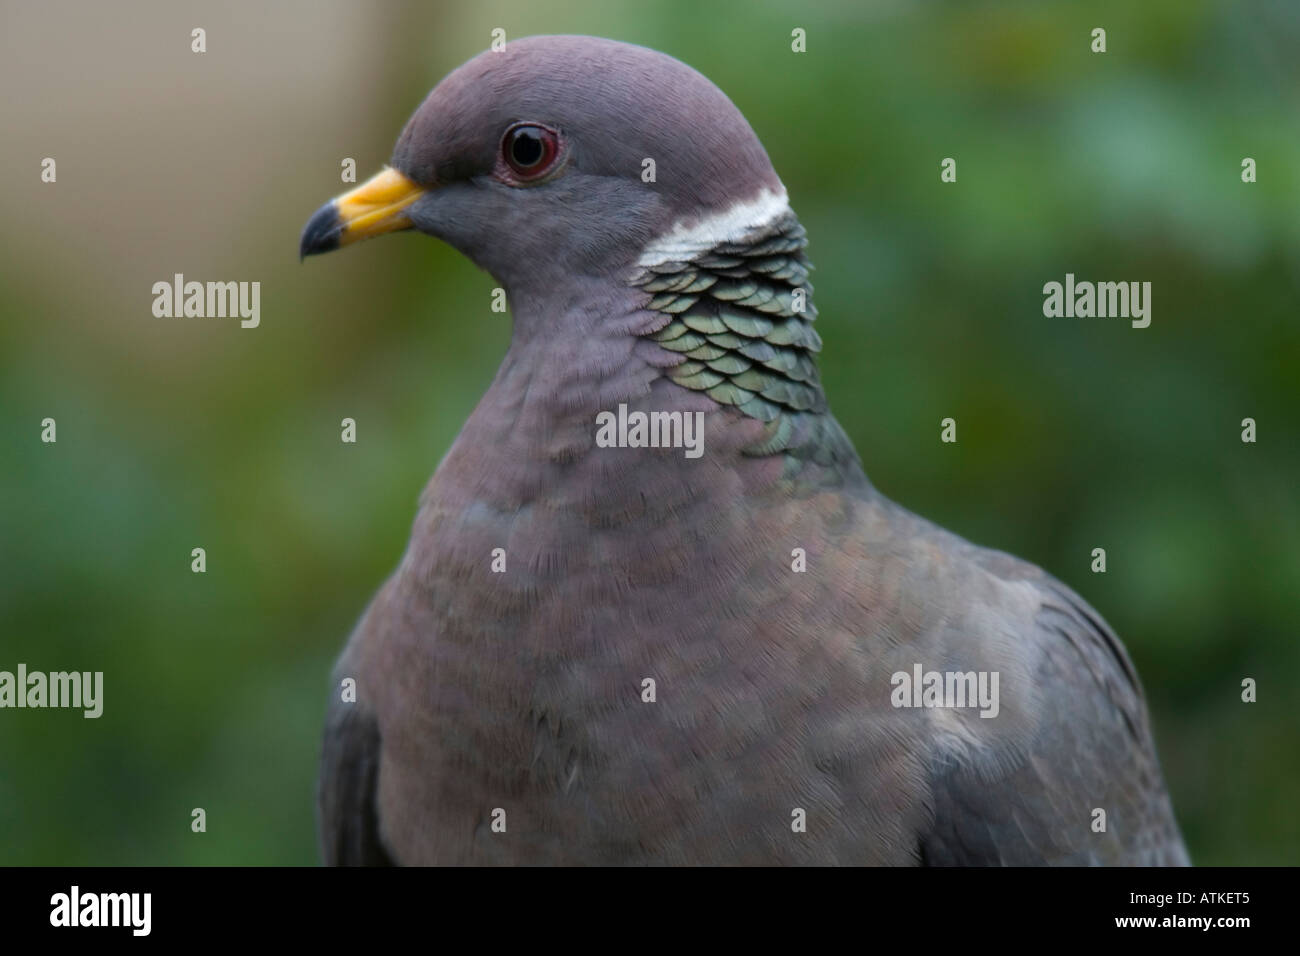 Headshot of a Band-tailed Pigeon Stock Photo